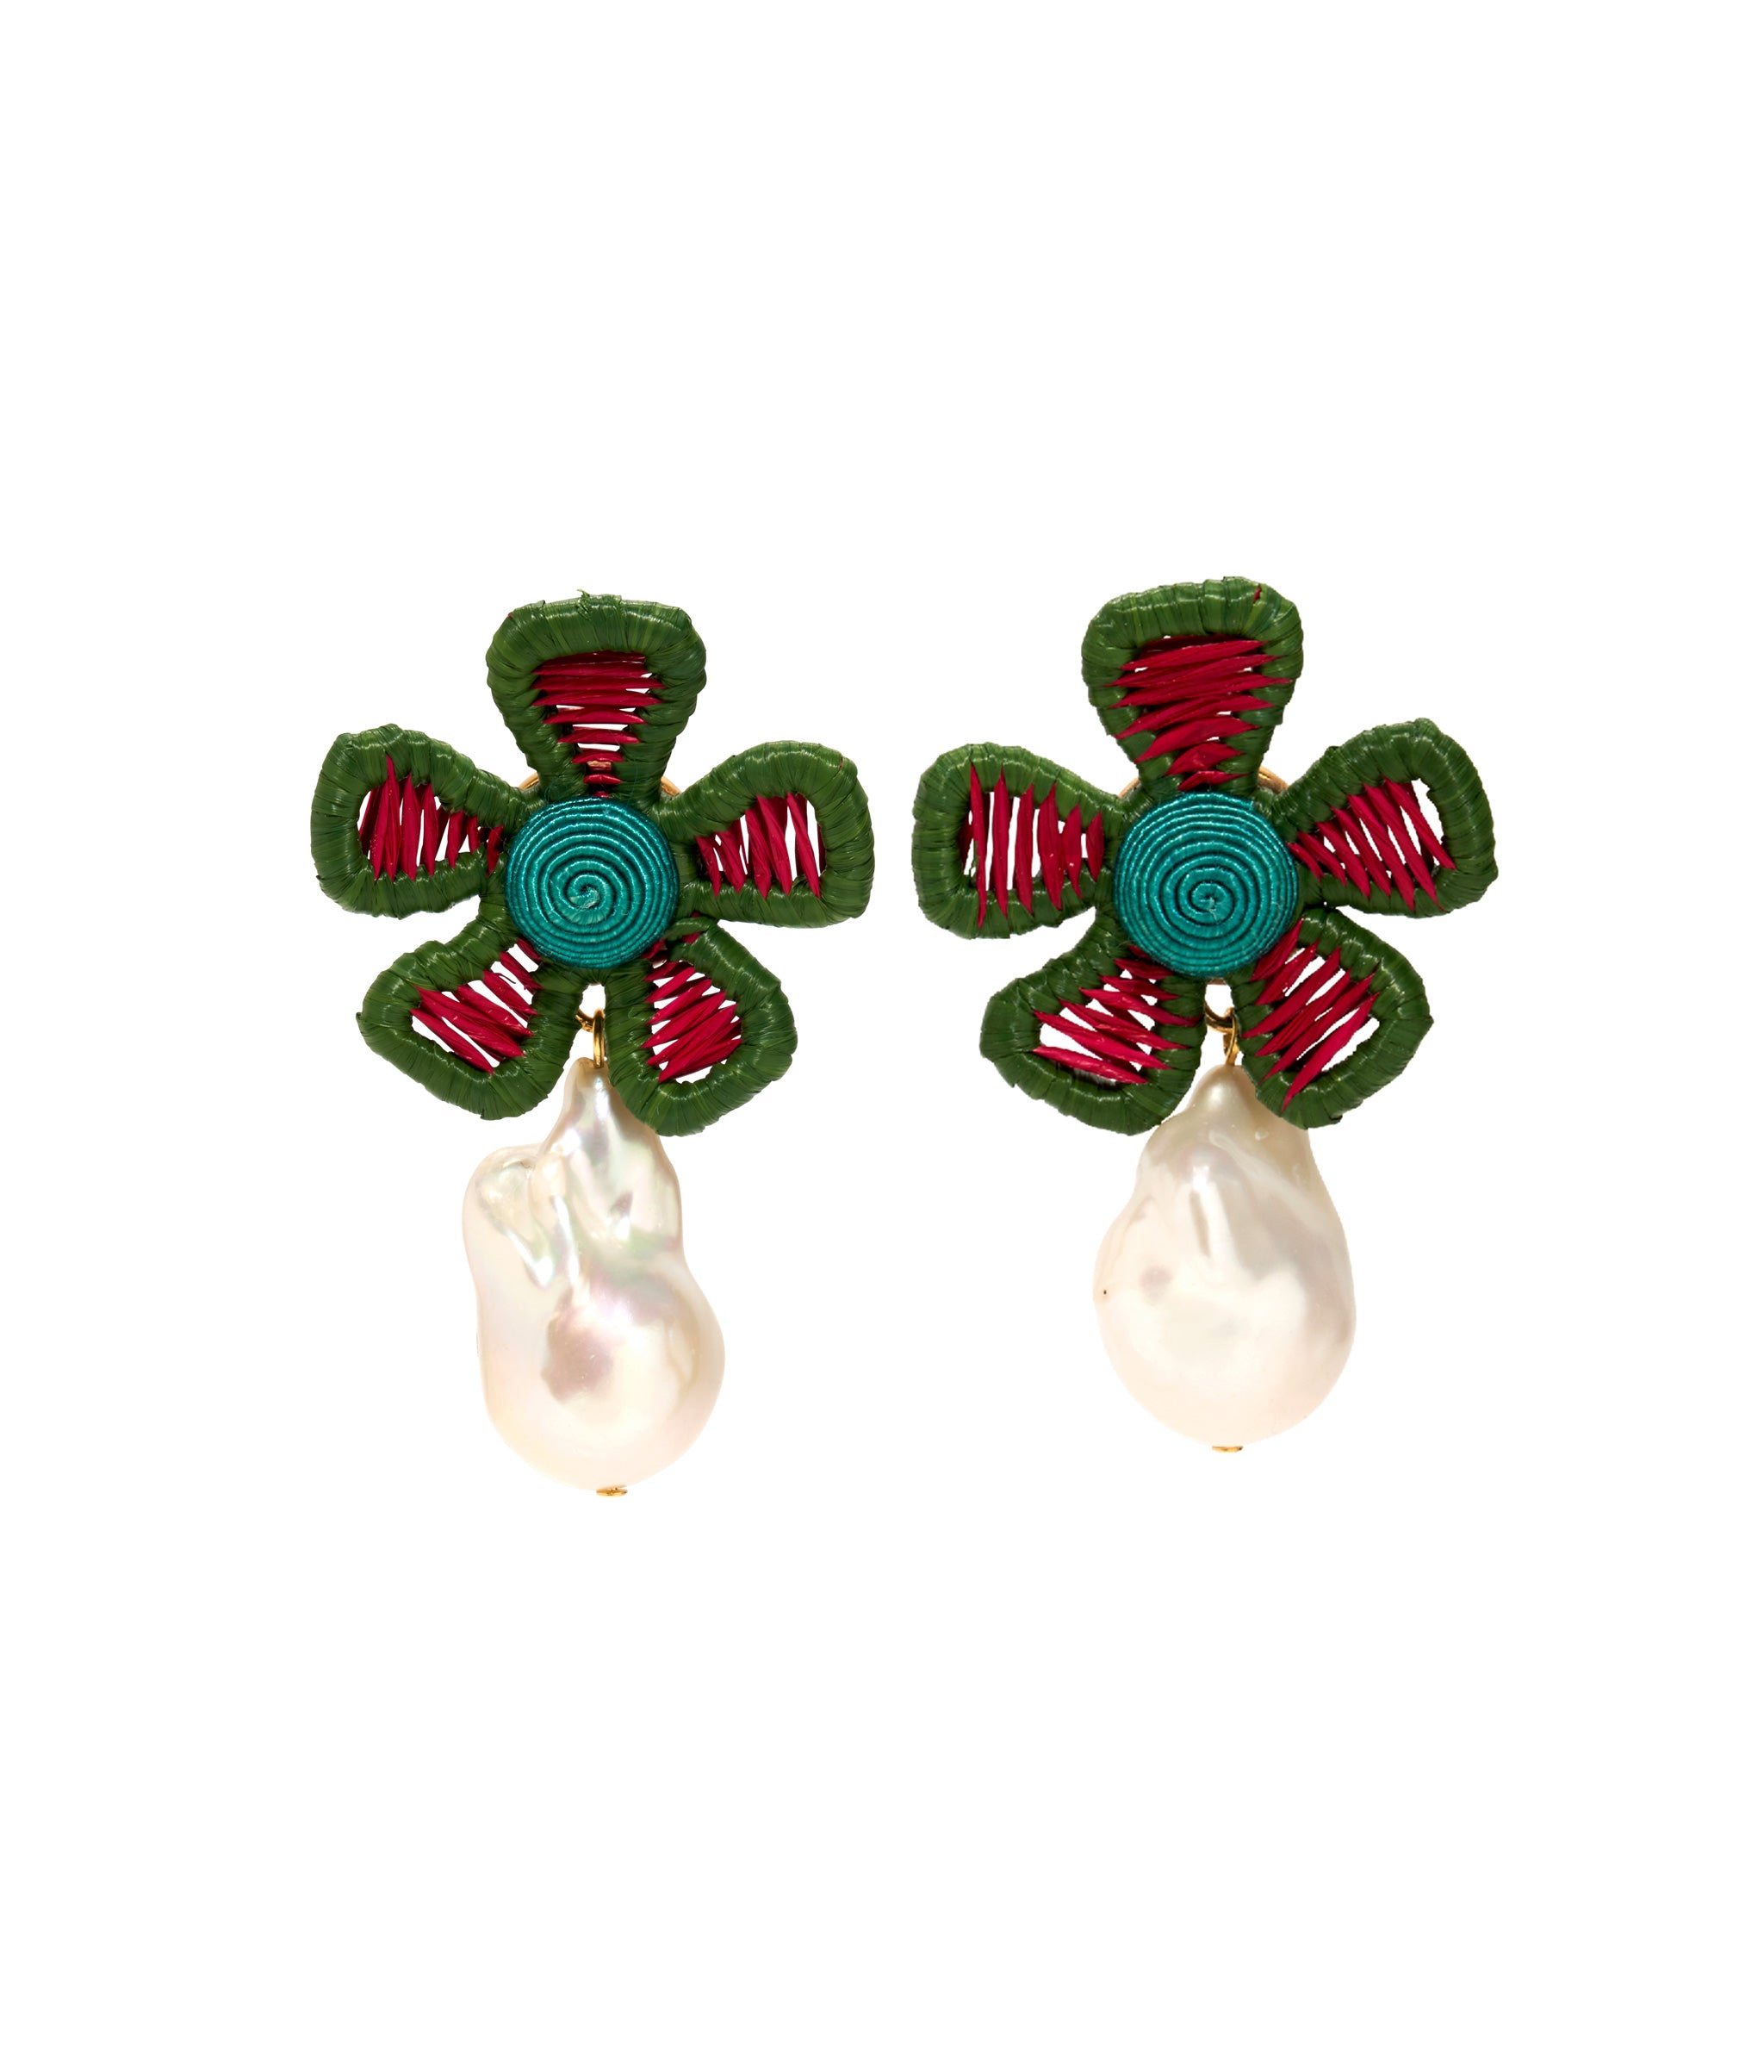 Crown Daisy Earrings in Macaw. Embroidered magenta and green raffia flowers with teal wrapped cord and pearl drops.